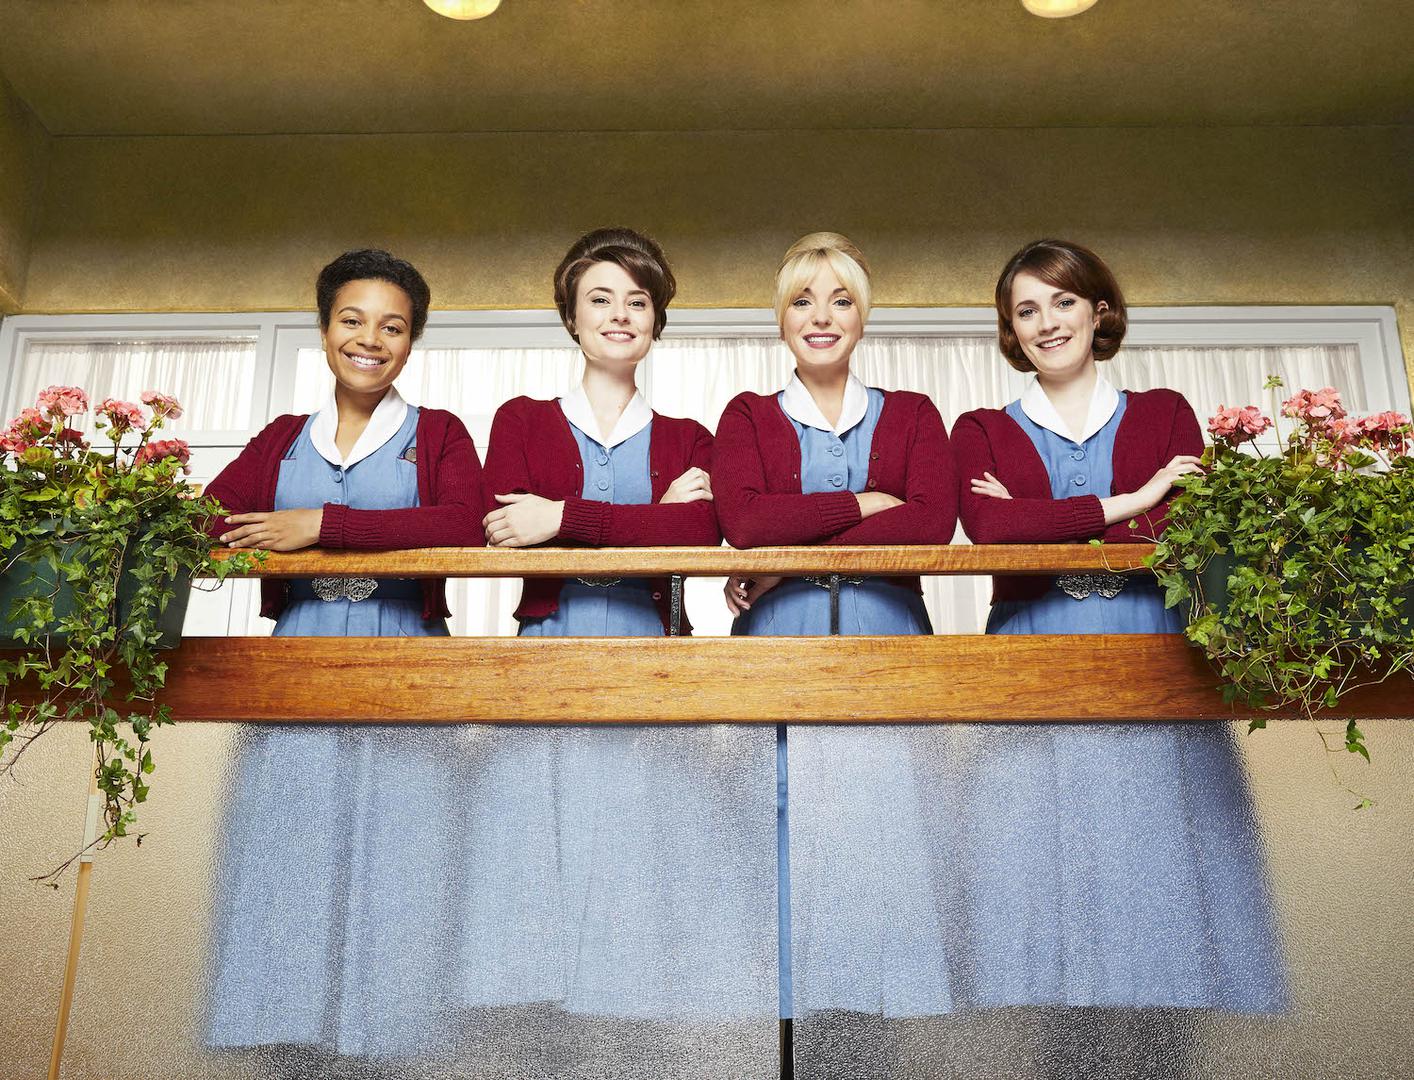 A promo shot from Season 7 of Call the Midwife